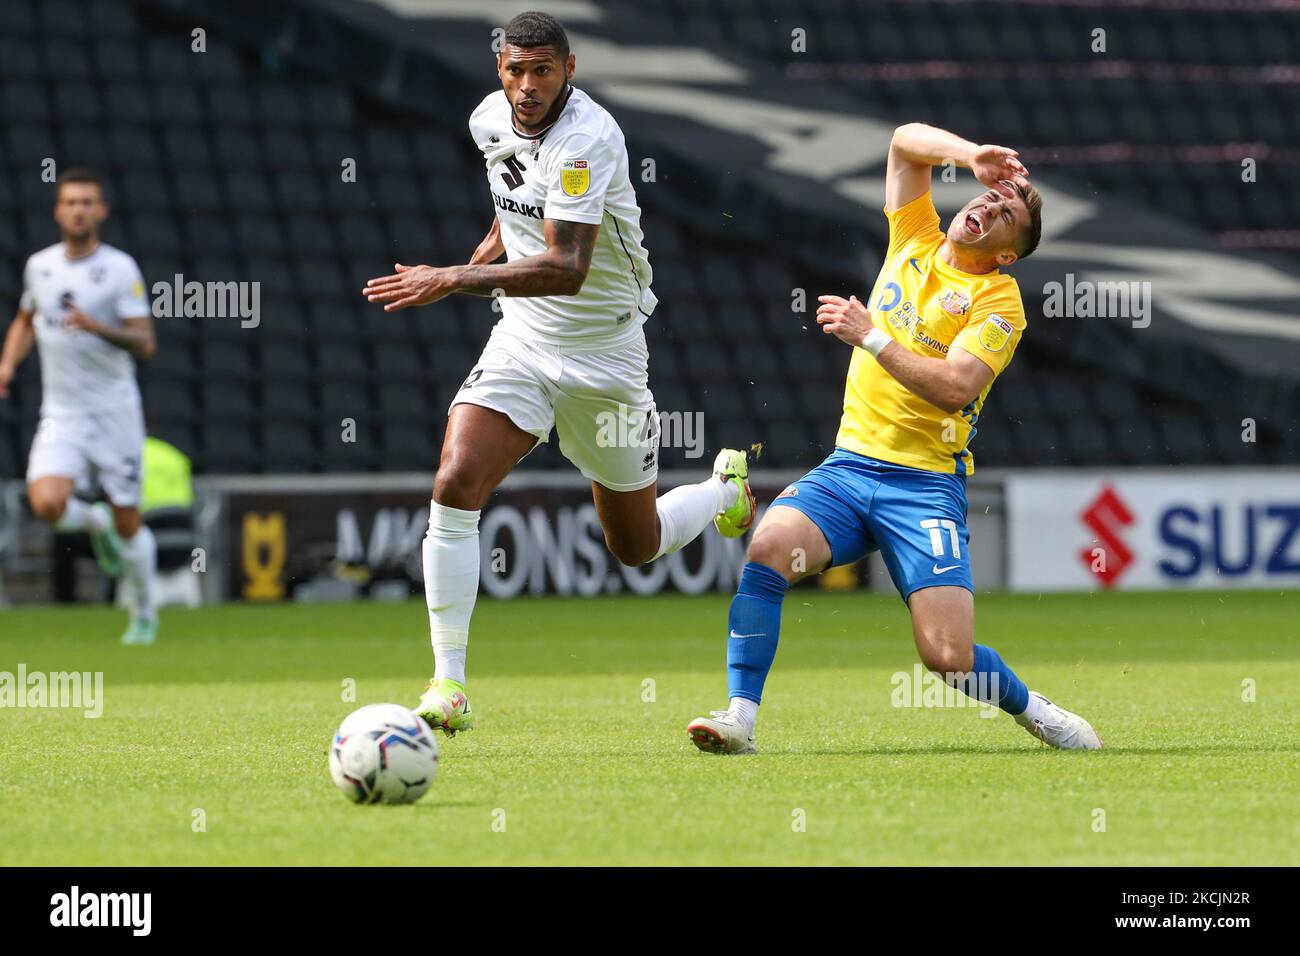 Sunderland's Lynden Gooch is challenged by Milton Keynes Dons Zak Jules during the first half of the Sky Bet League 1 match between MK Dons and Sunderland at Stadium MK, Milton Keynes on Saturday 14th August 2021. (Photo by John Cripps/MI News/NurPhoto) Stock Photo